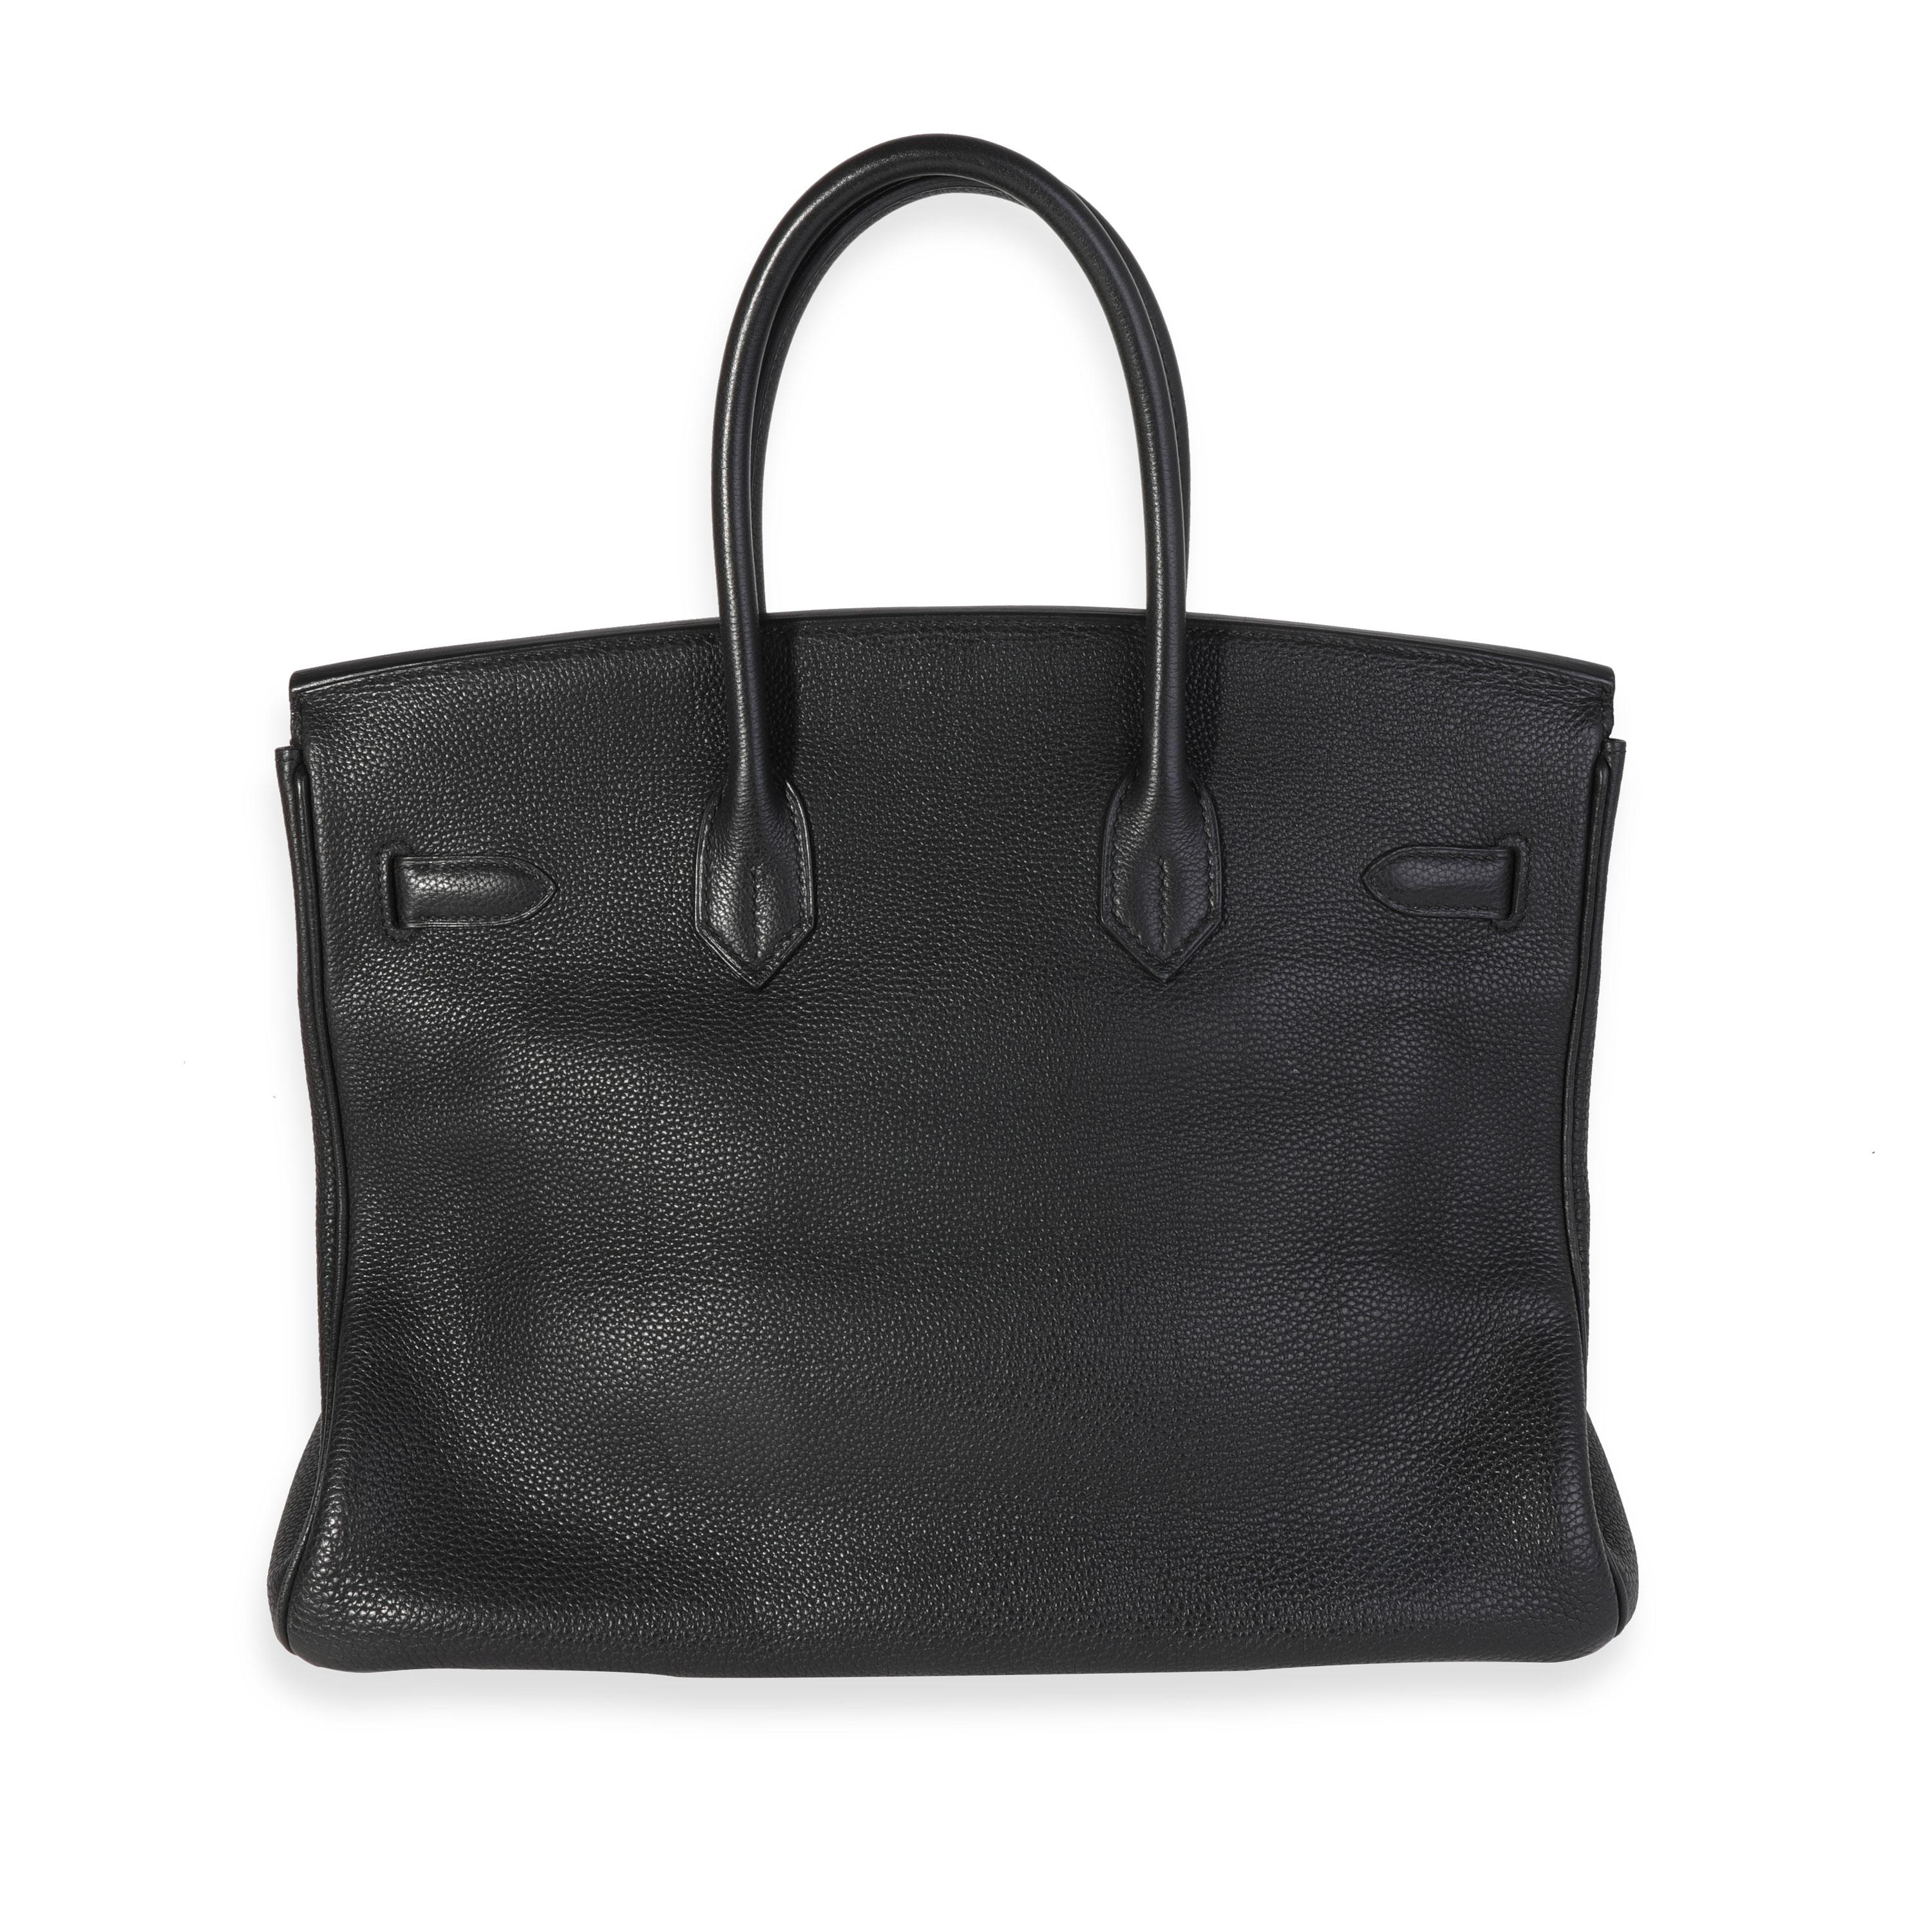 Listing Title: Hermès Black Togo Birkin 35 PHW
SKU: 119403
Condition: Pre-owned (3000)
Handbag Condition: Very Good
Condition Comments: Very Good Condition. Scuffing to corners. Light scuffing to exterior leather. Scratching to hardware. Scuffing